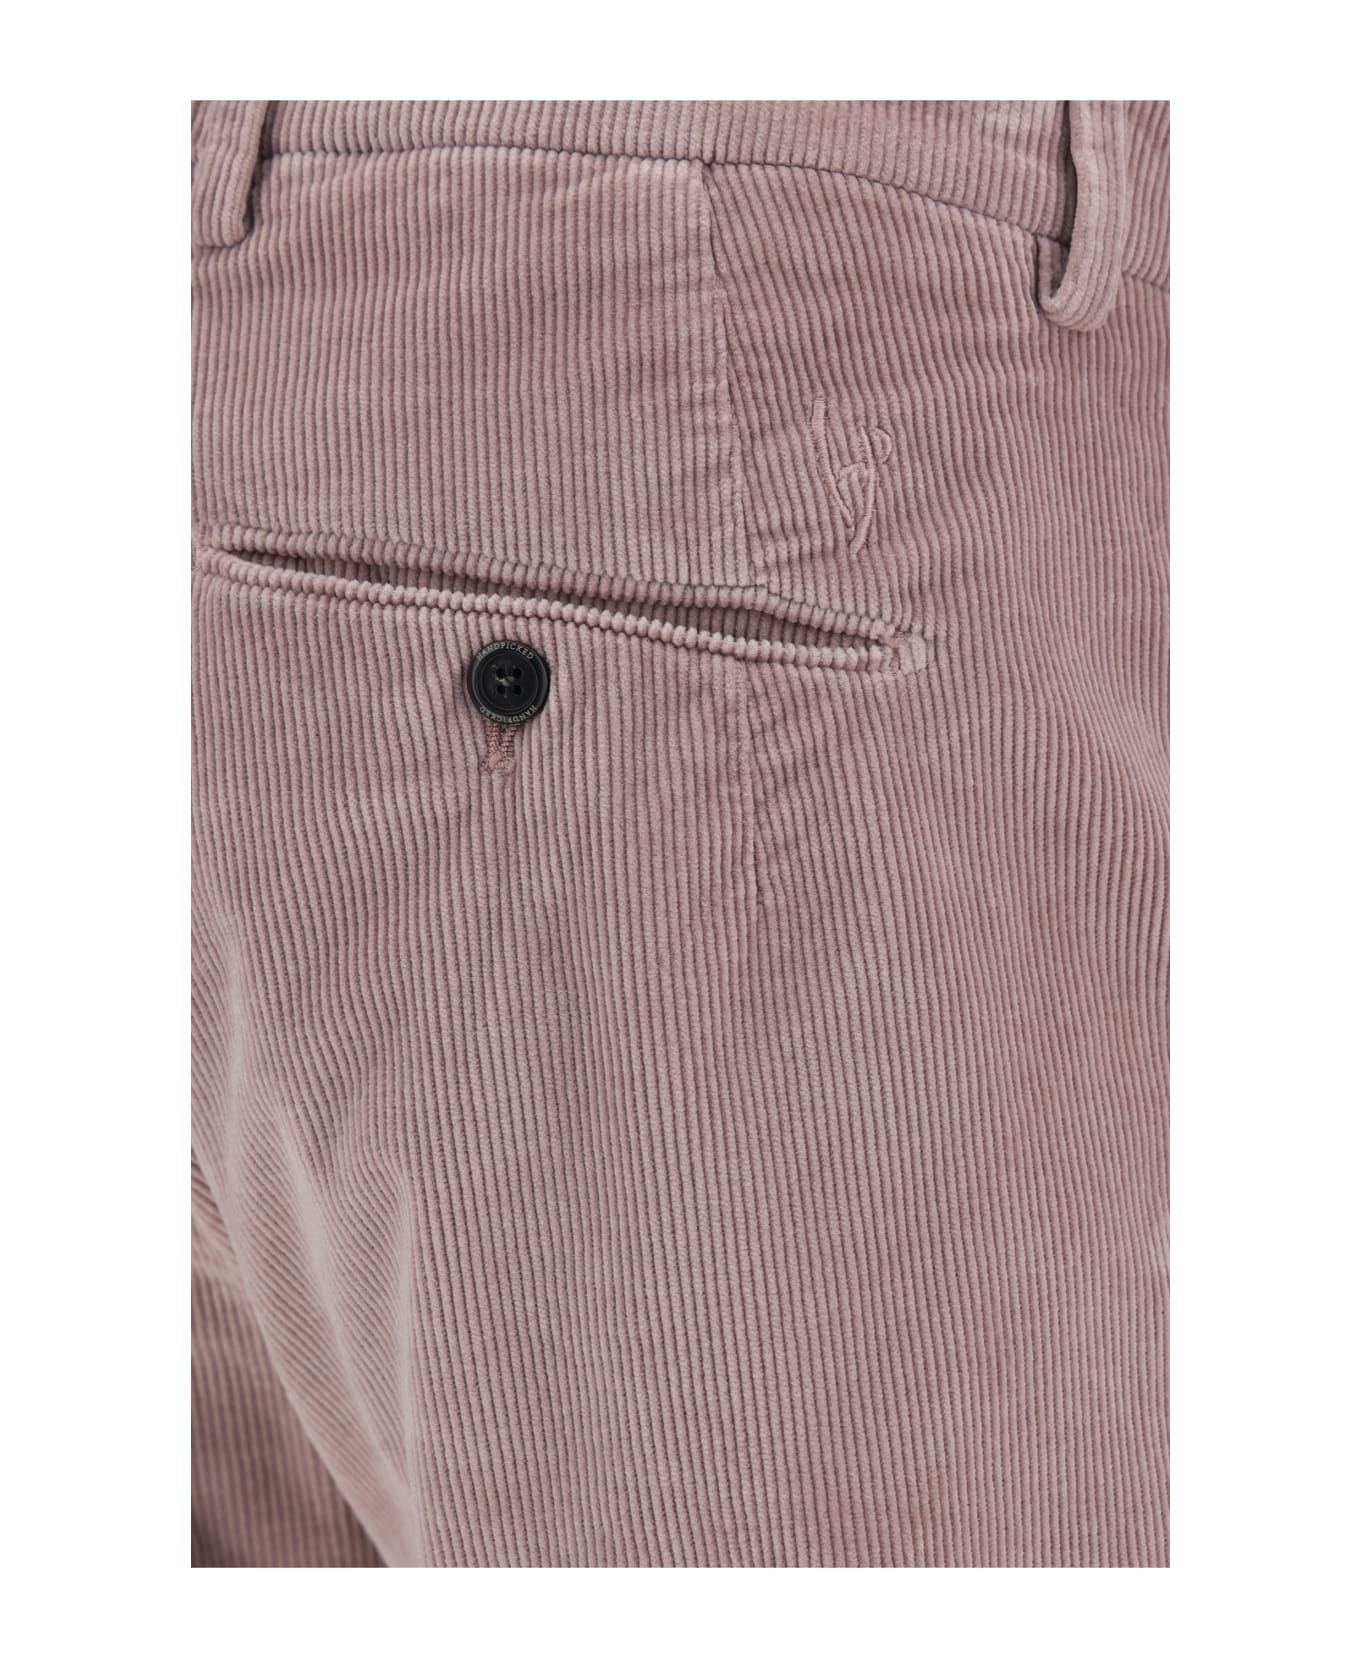 Hand Picked Pants - Rosa Polvere